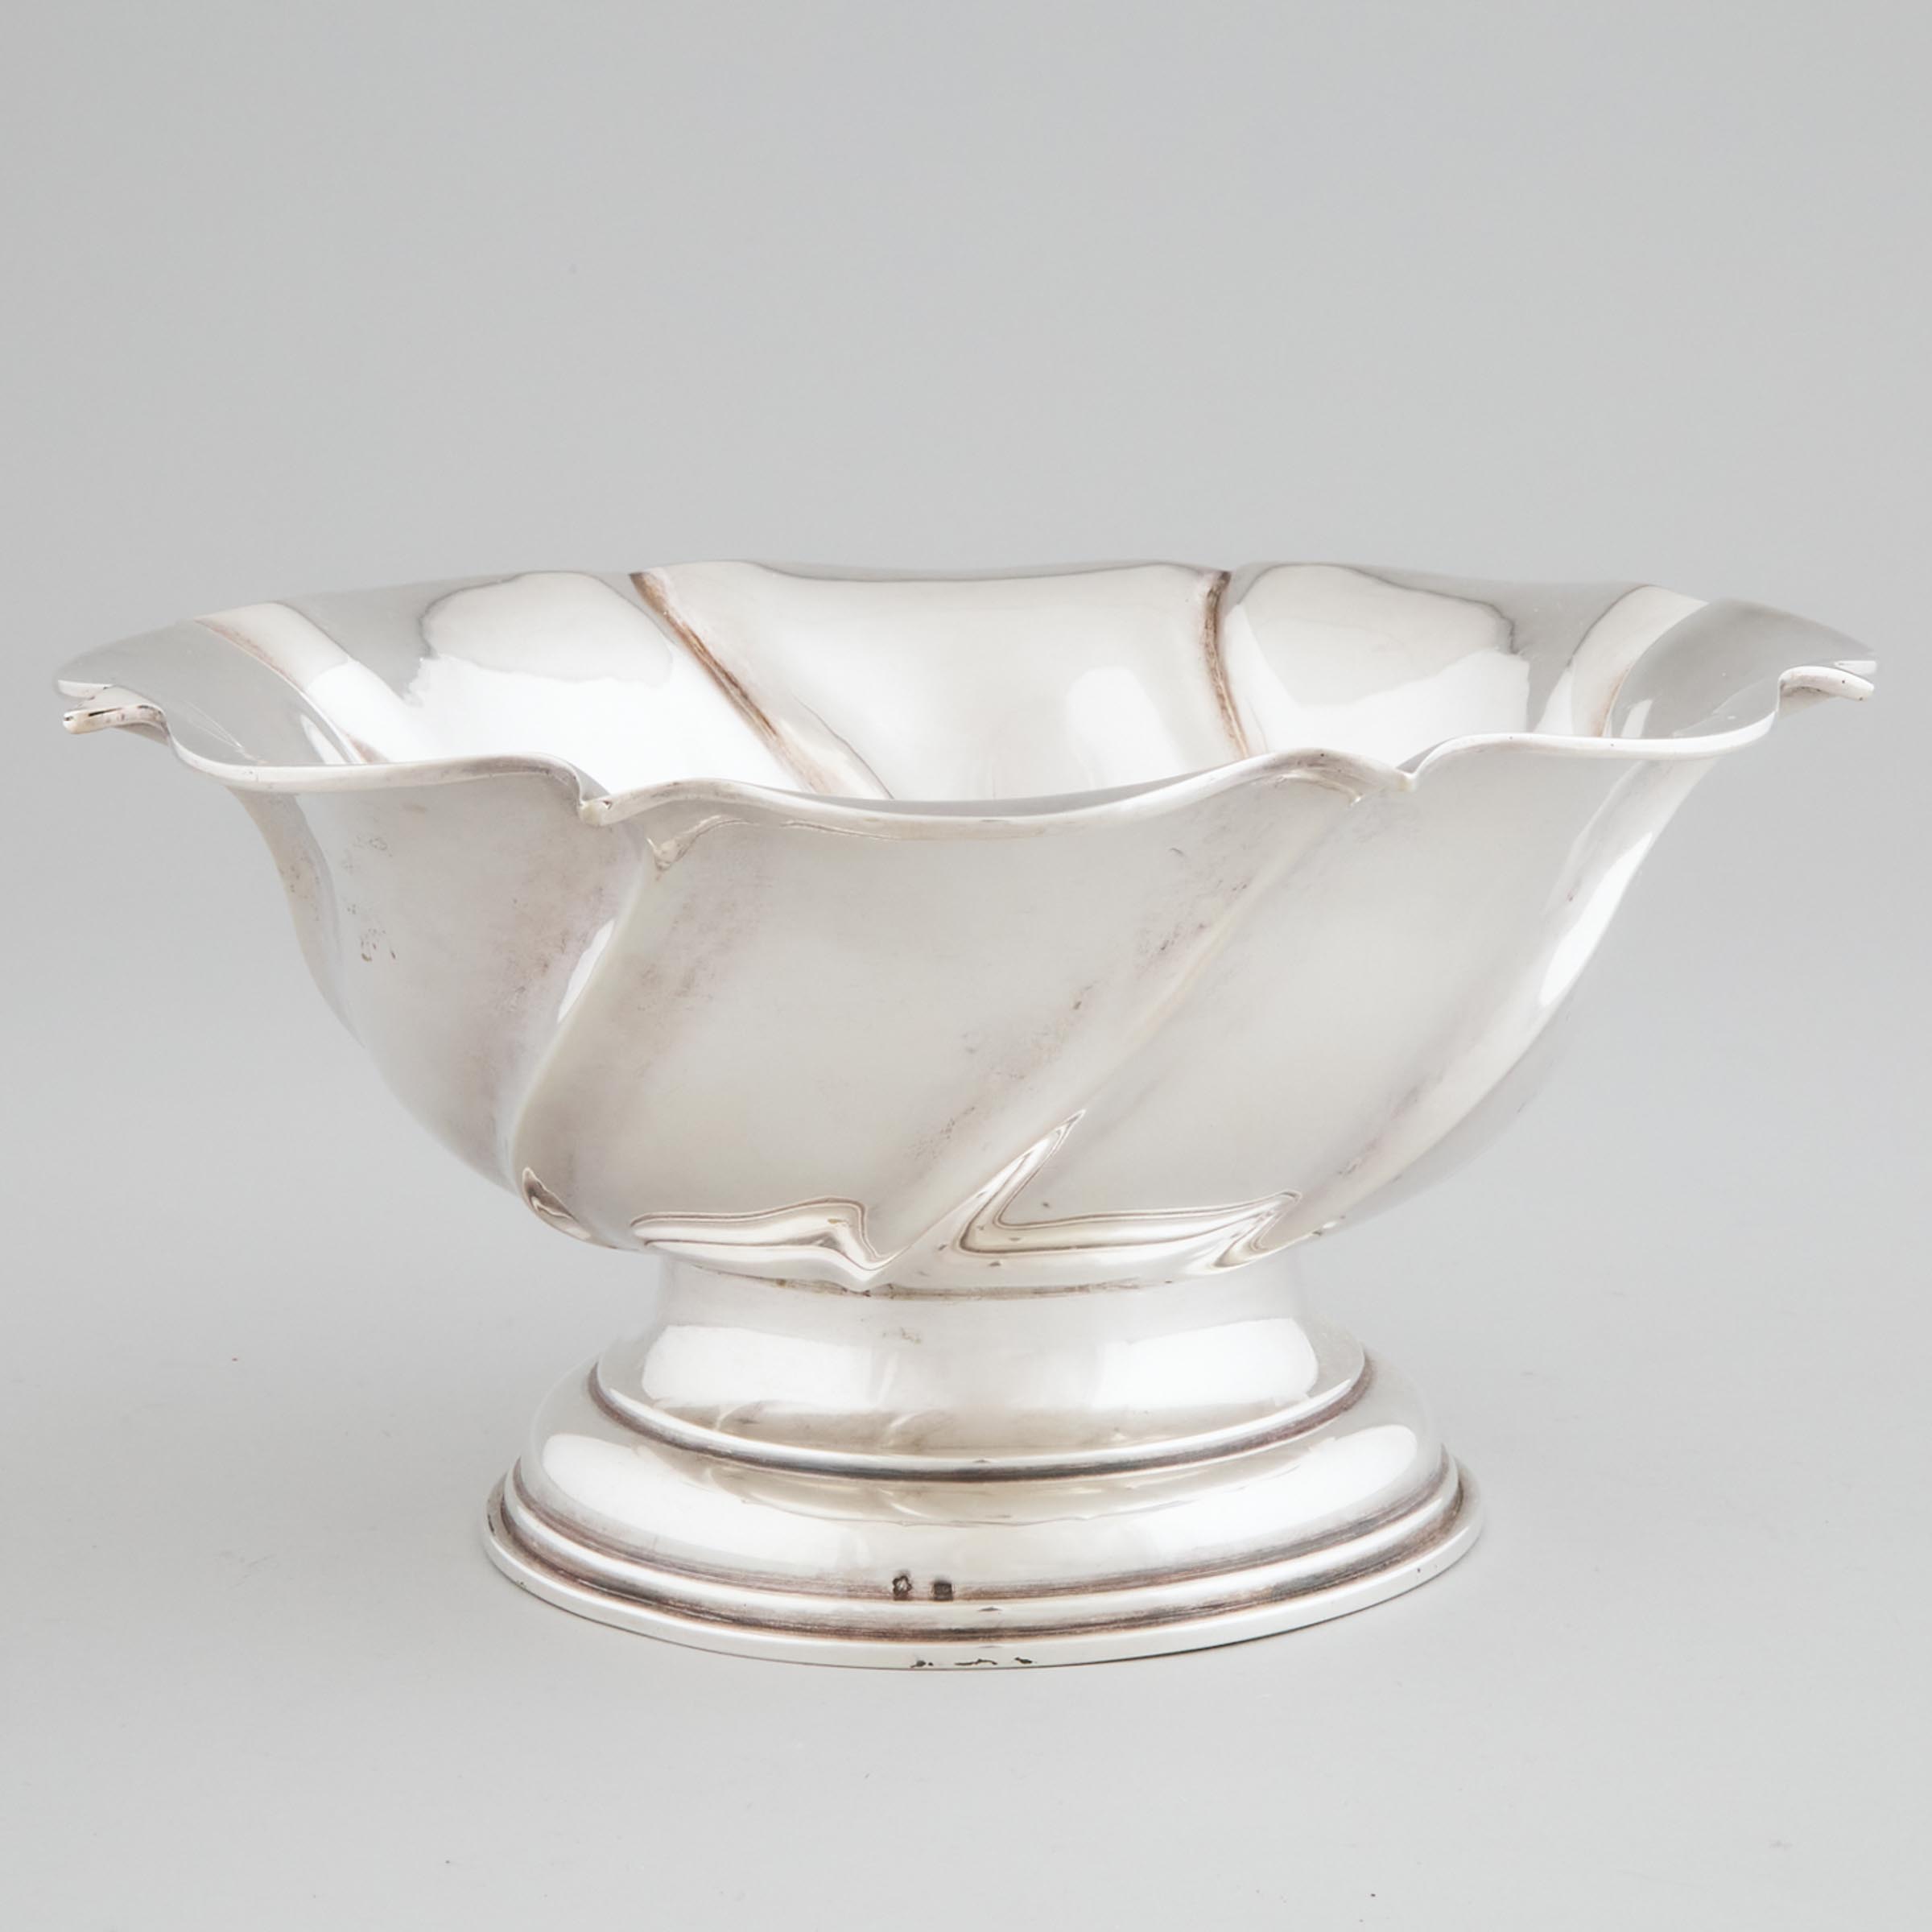 Austro-Hungarian Silver Footed Bowl, Prague, 20th century